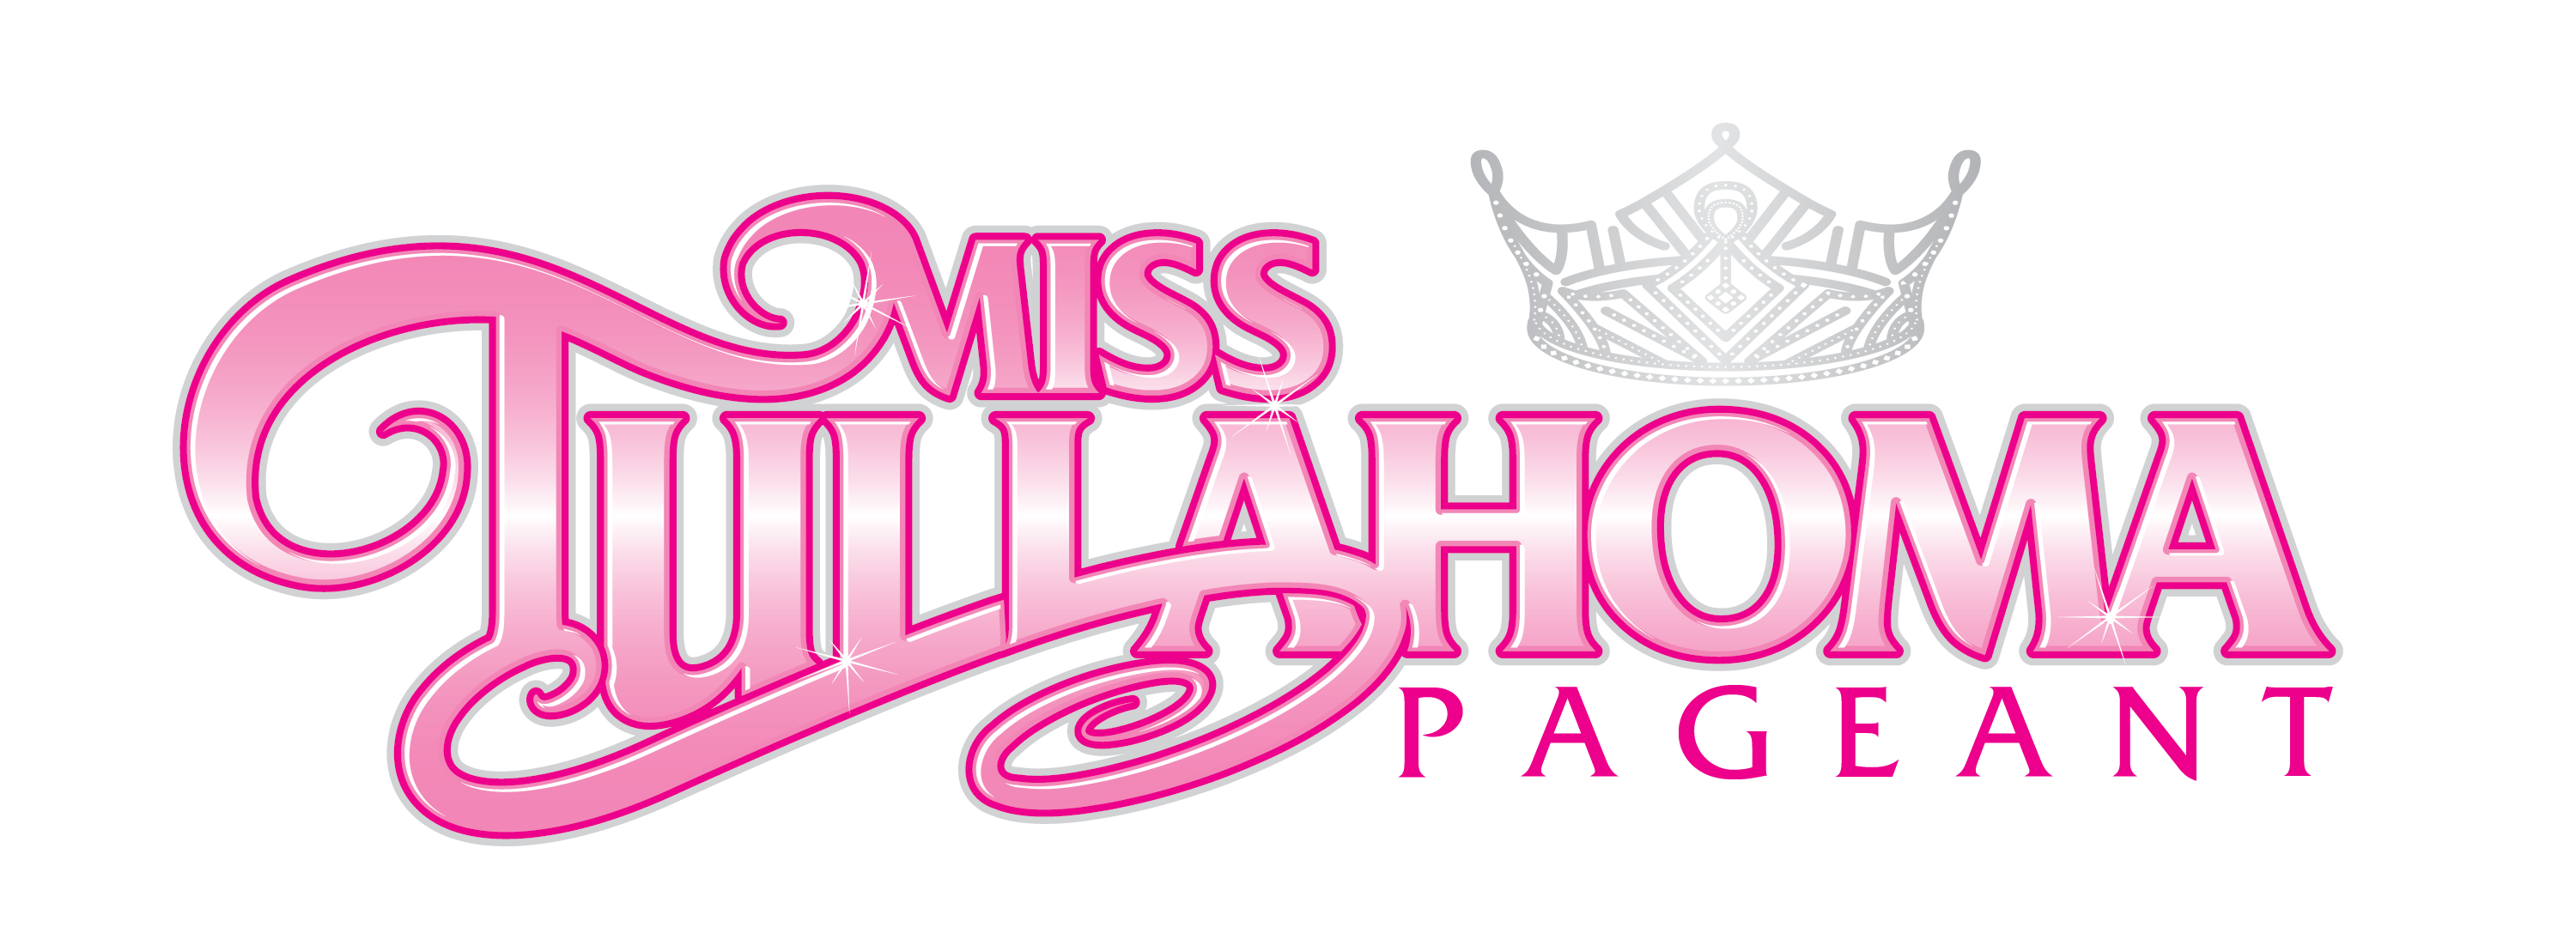 Miss Tullahoma Pageant